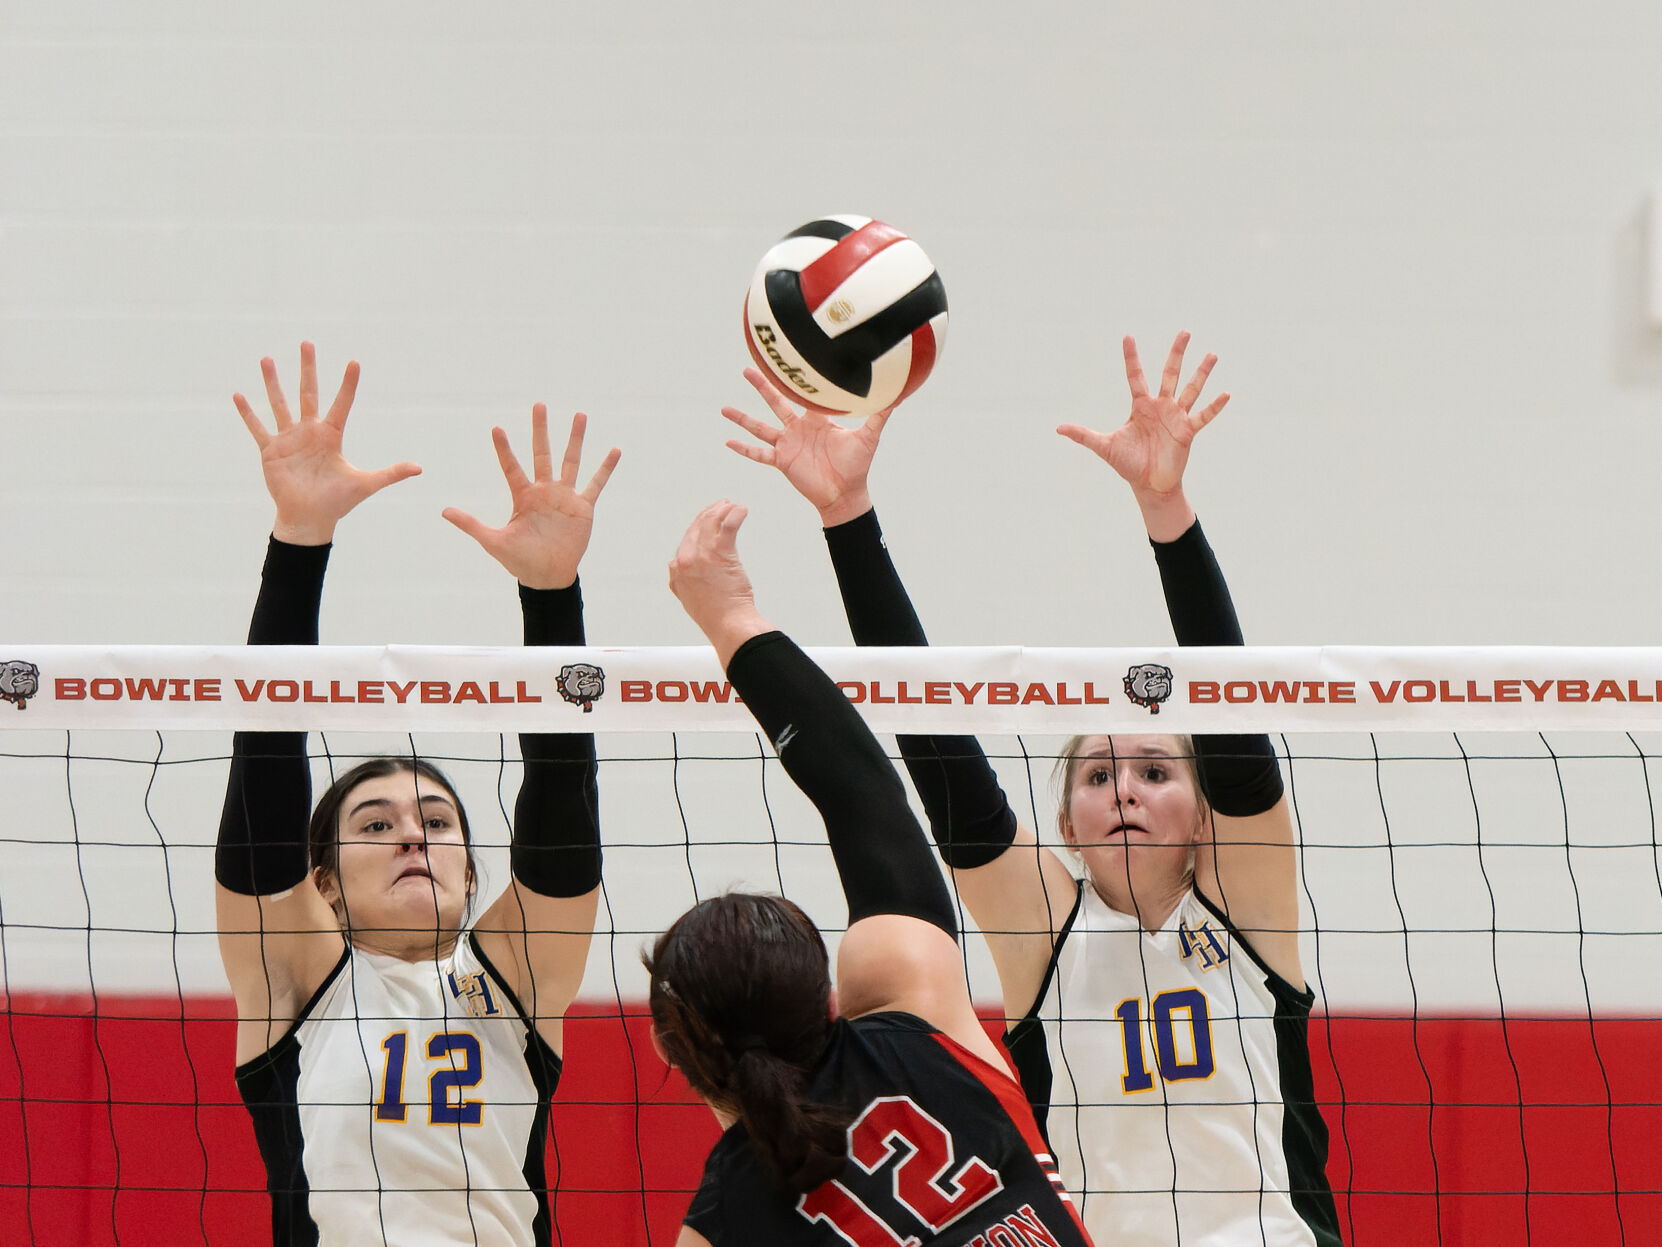 Annie Witt’s 18 Kills Propel Lady Panthers to Victory in Class 5A State Regional Quarterfinals